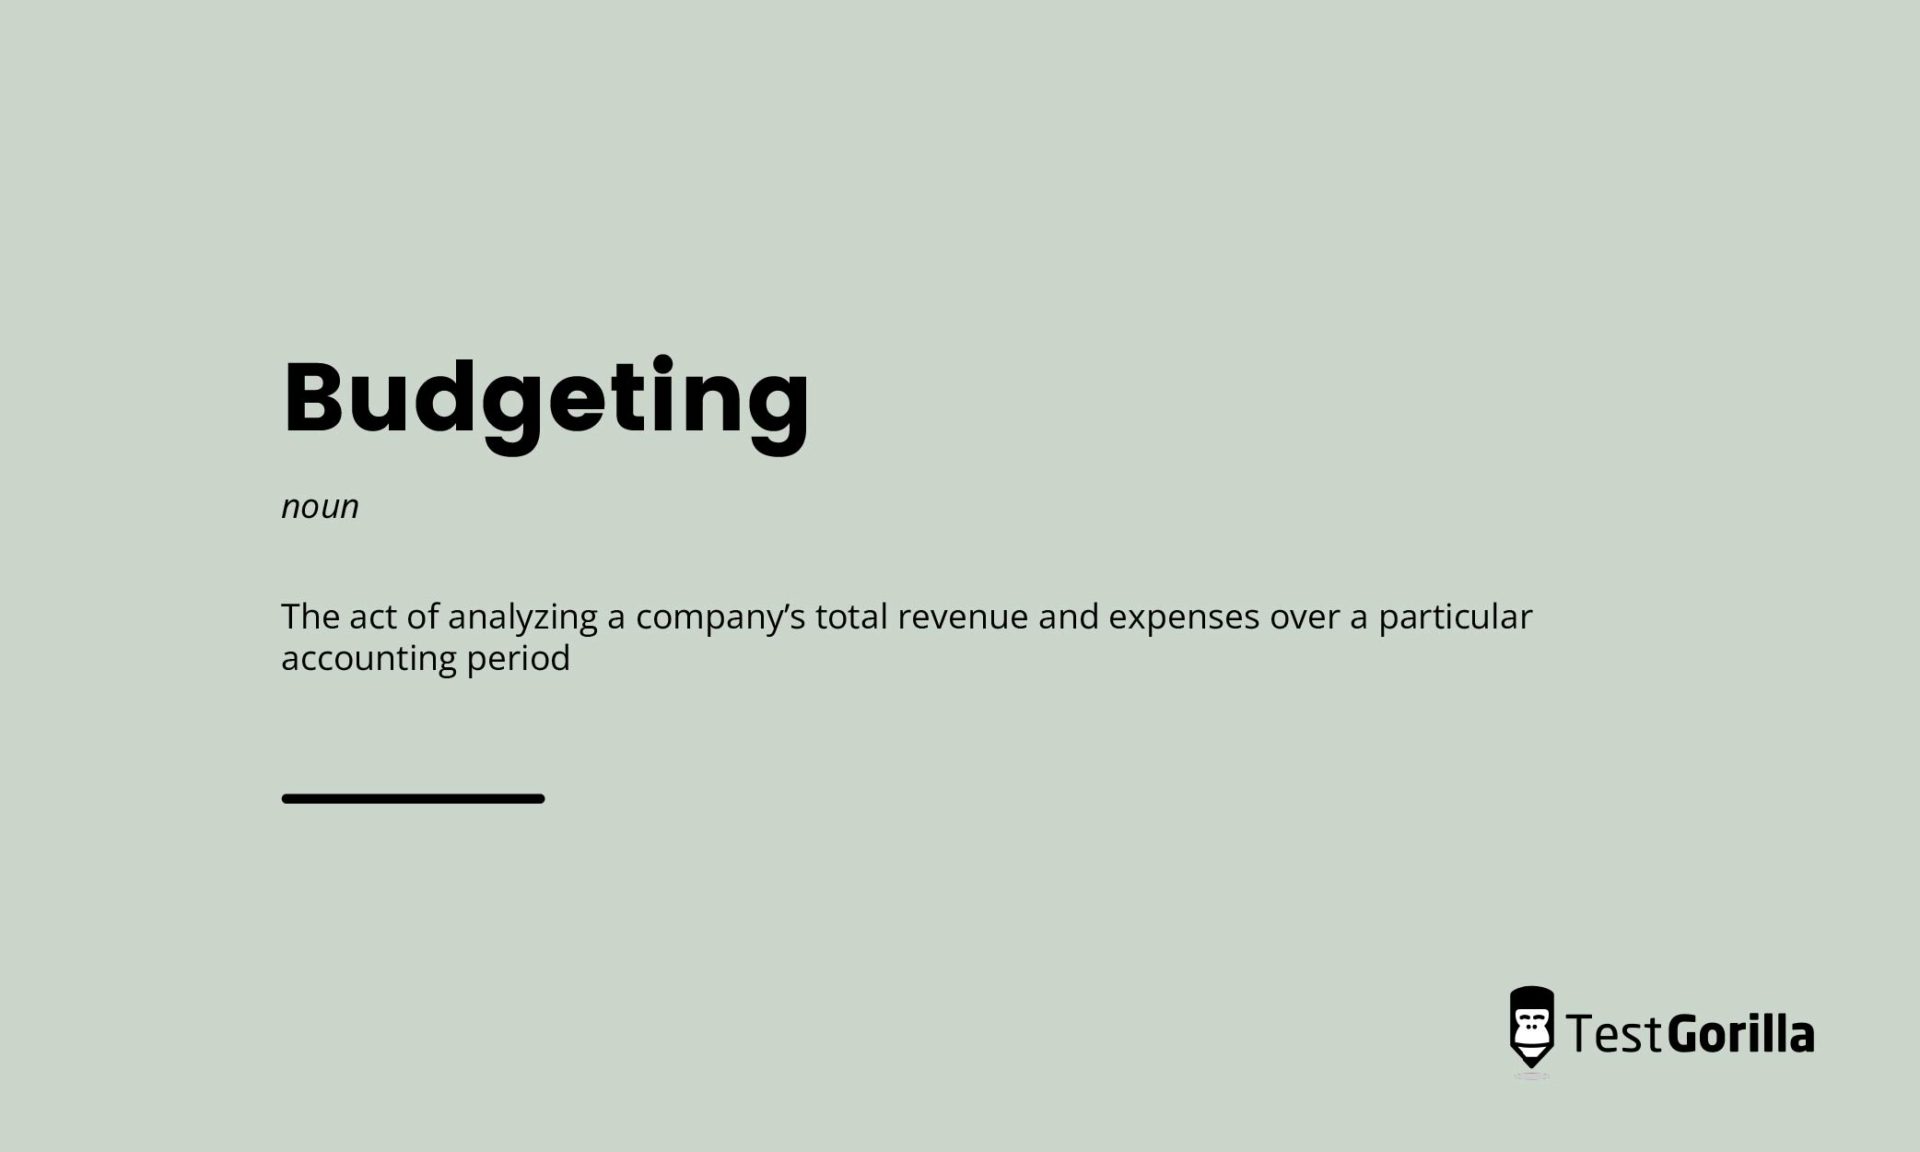 Budgeting is the act of analyzing a company’s total revenue and expenses over a particular accounting period.